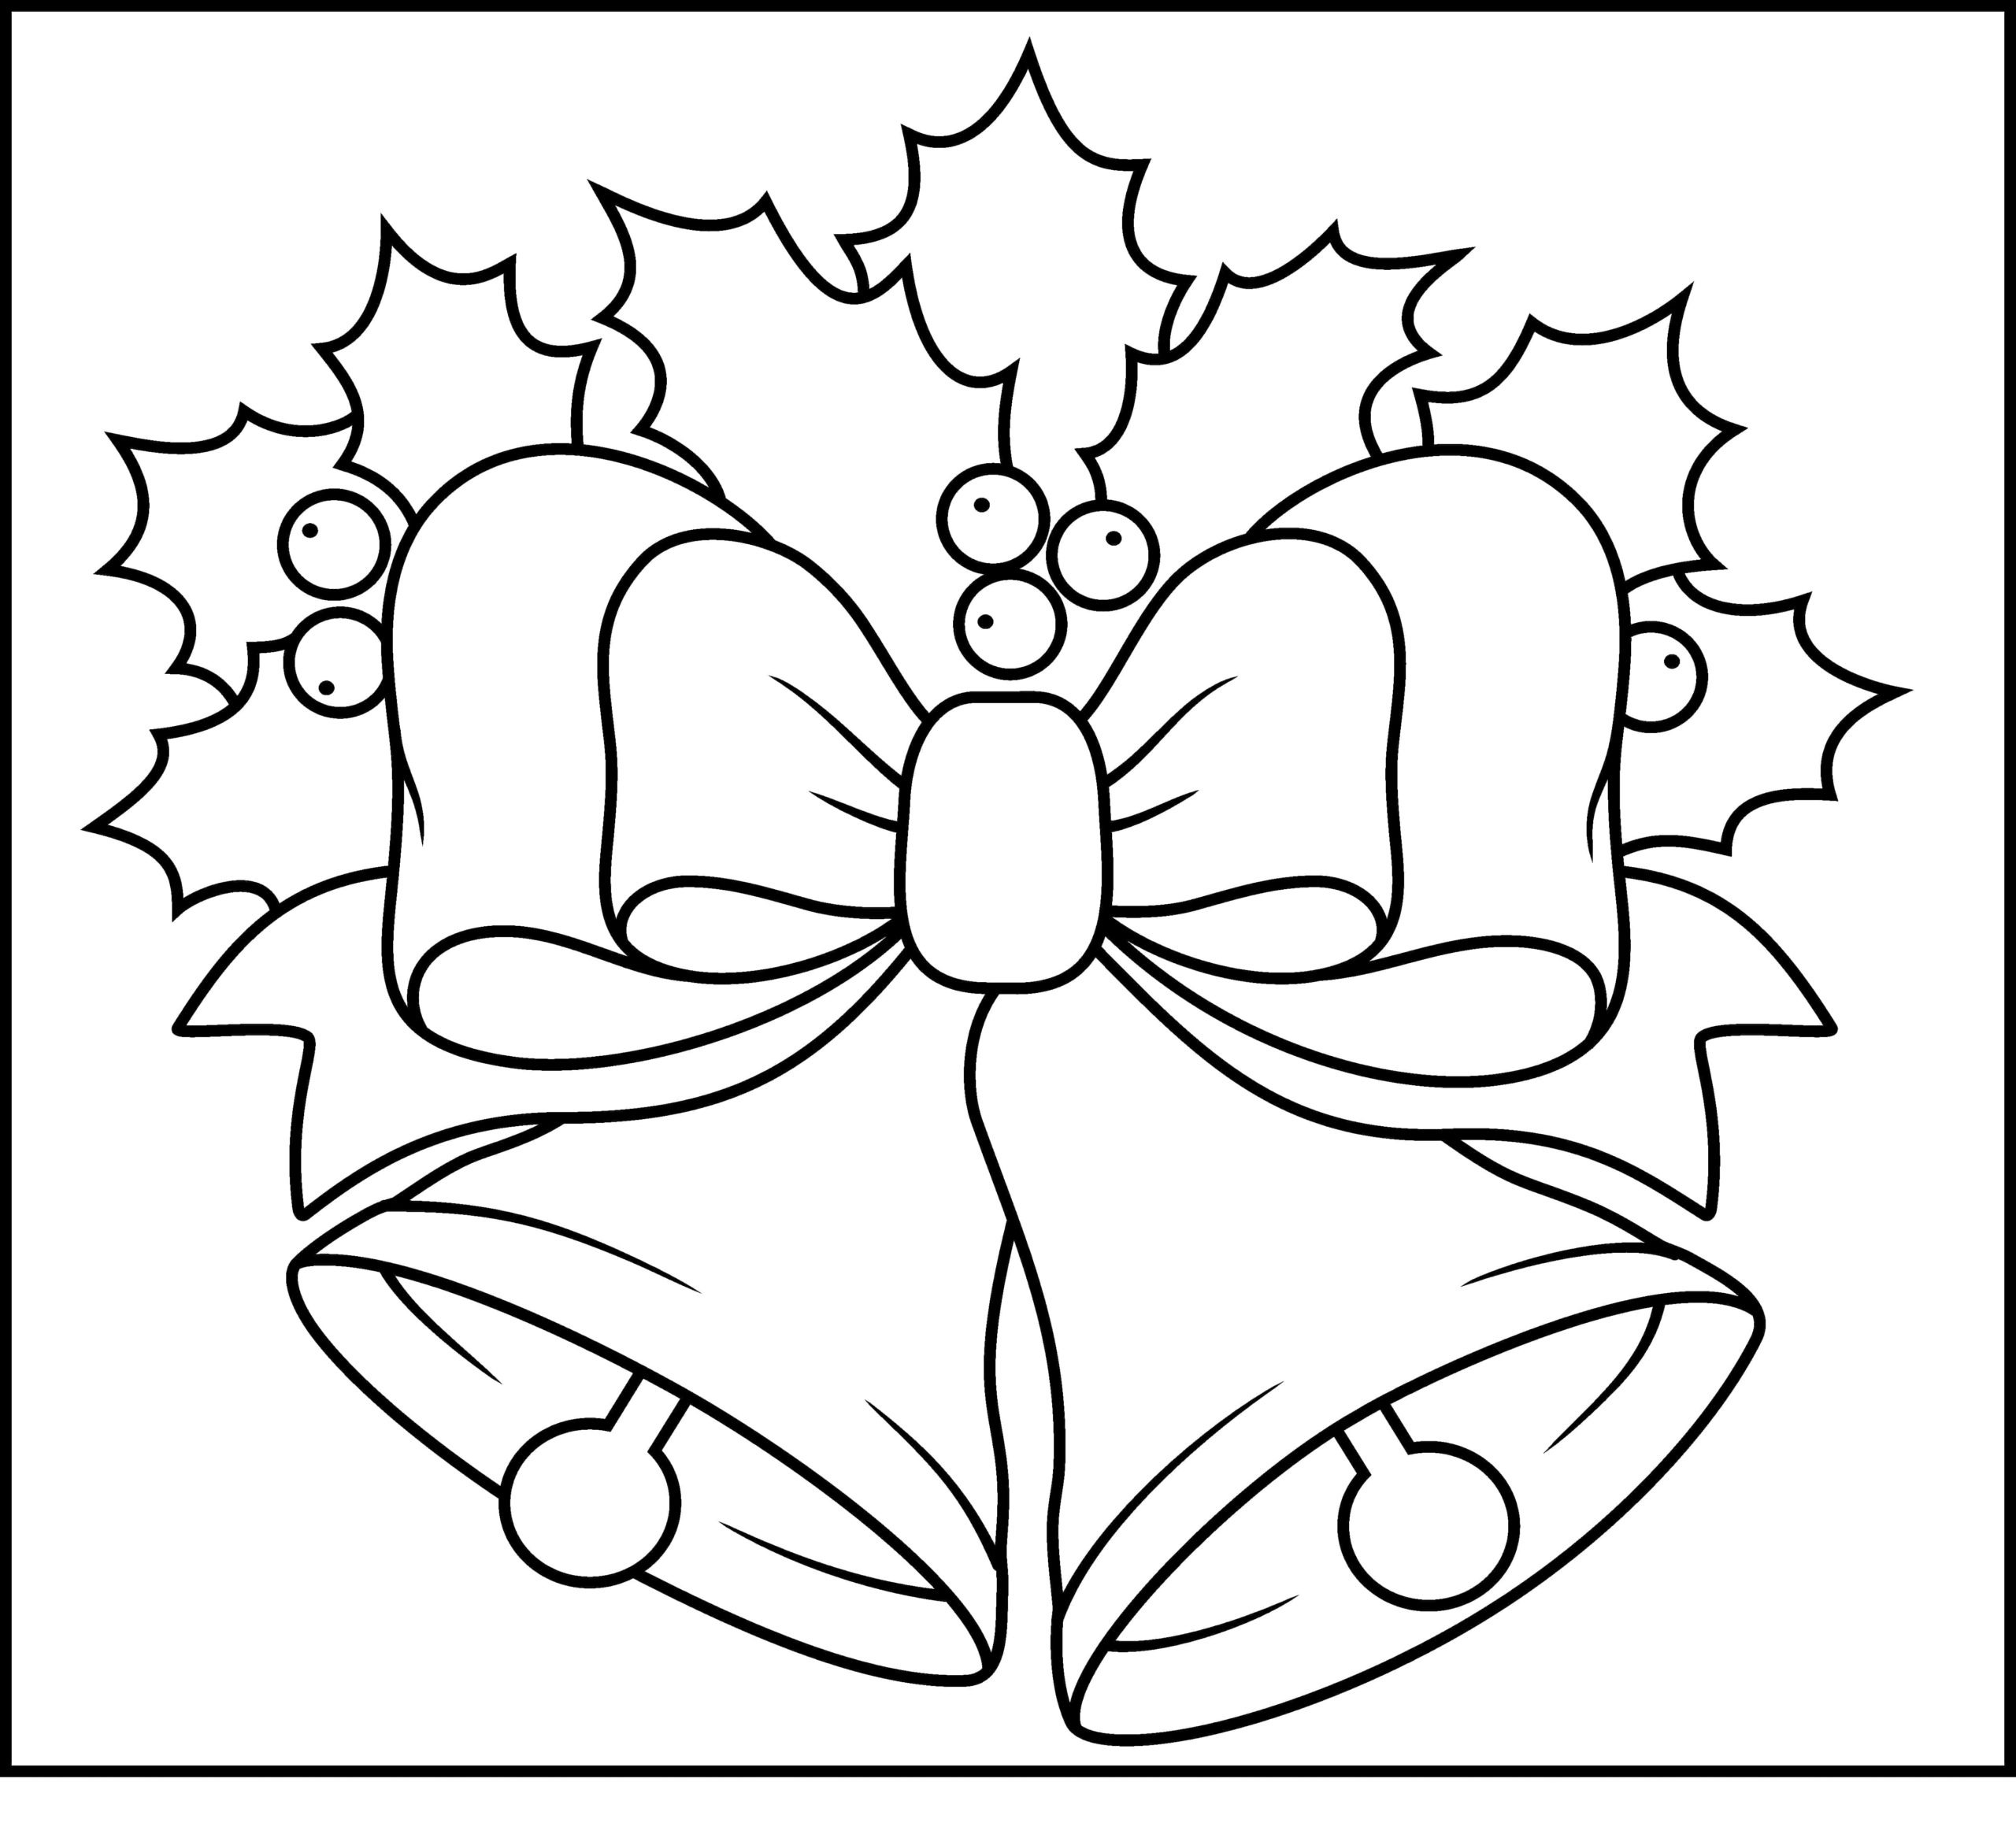 The Ringing Of Bells Coloring Page